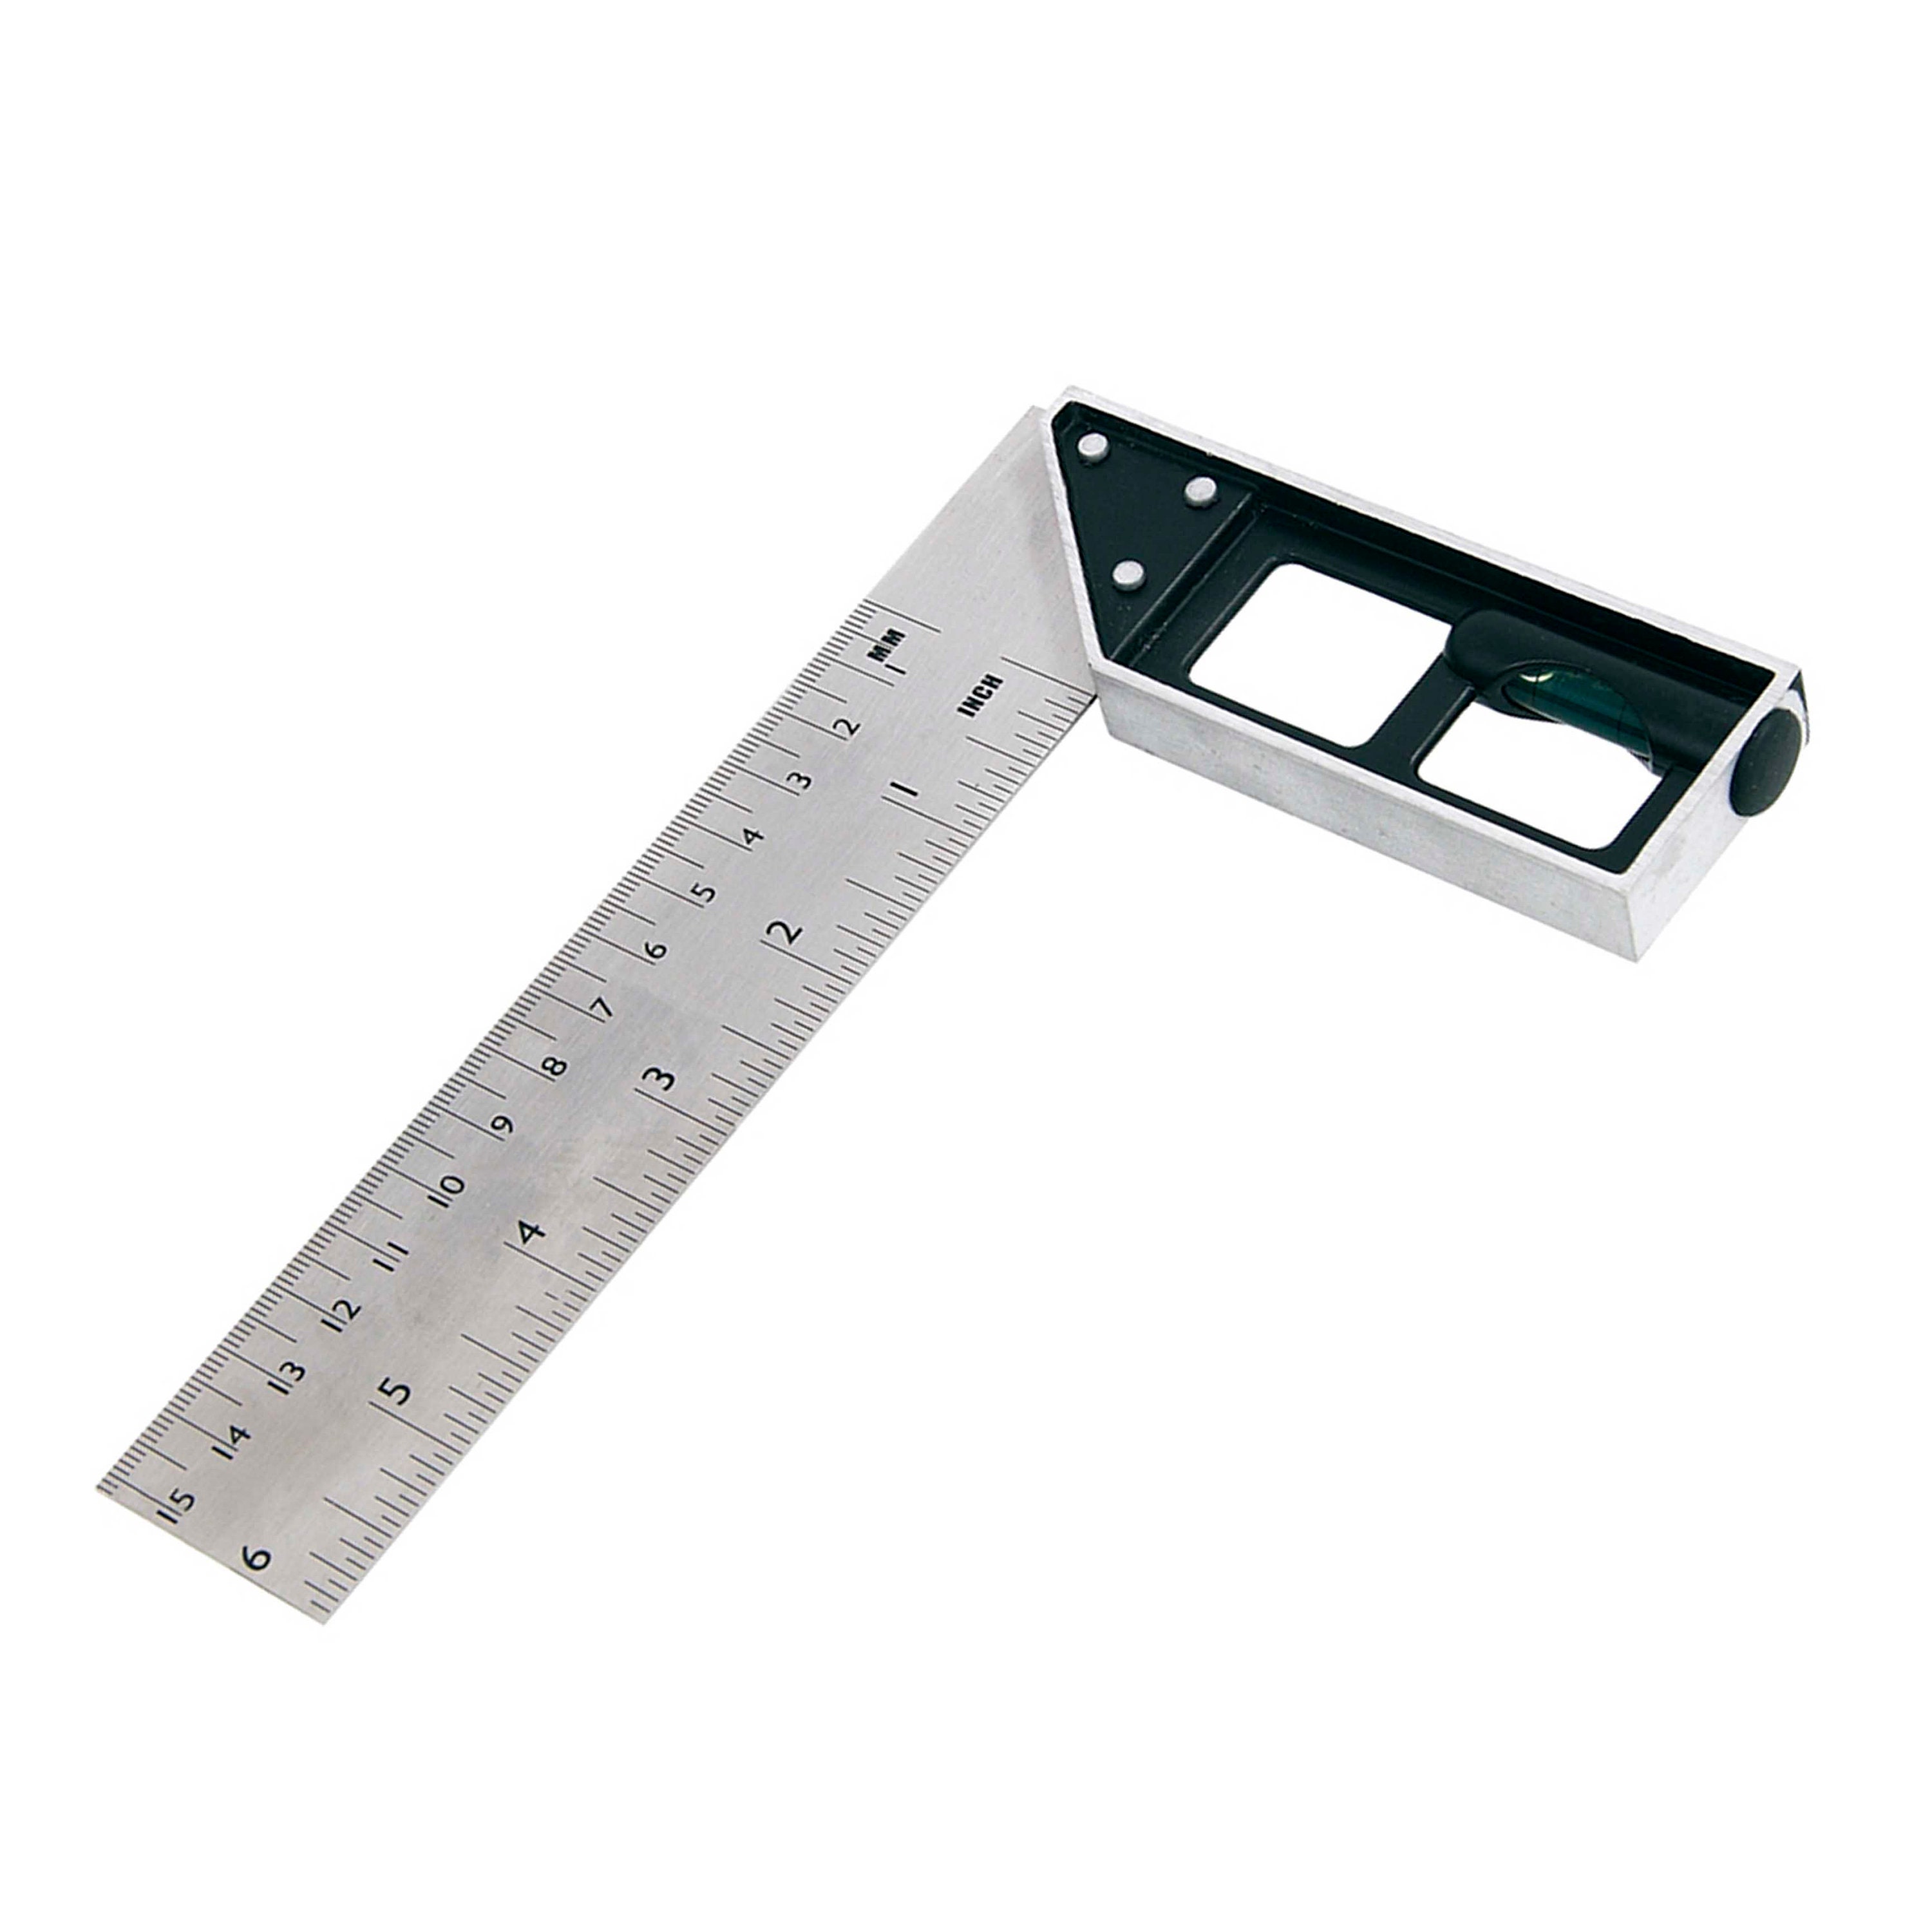 ZZTX Metal Ruler Stainless Steel Ruler Straight Edge Measuring Tool 6 Inch  +12 Inch + 16 Inch 6 Pack Set